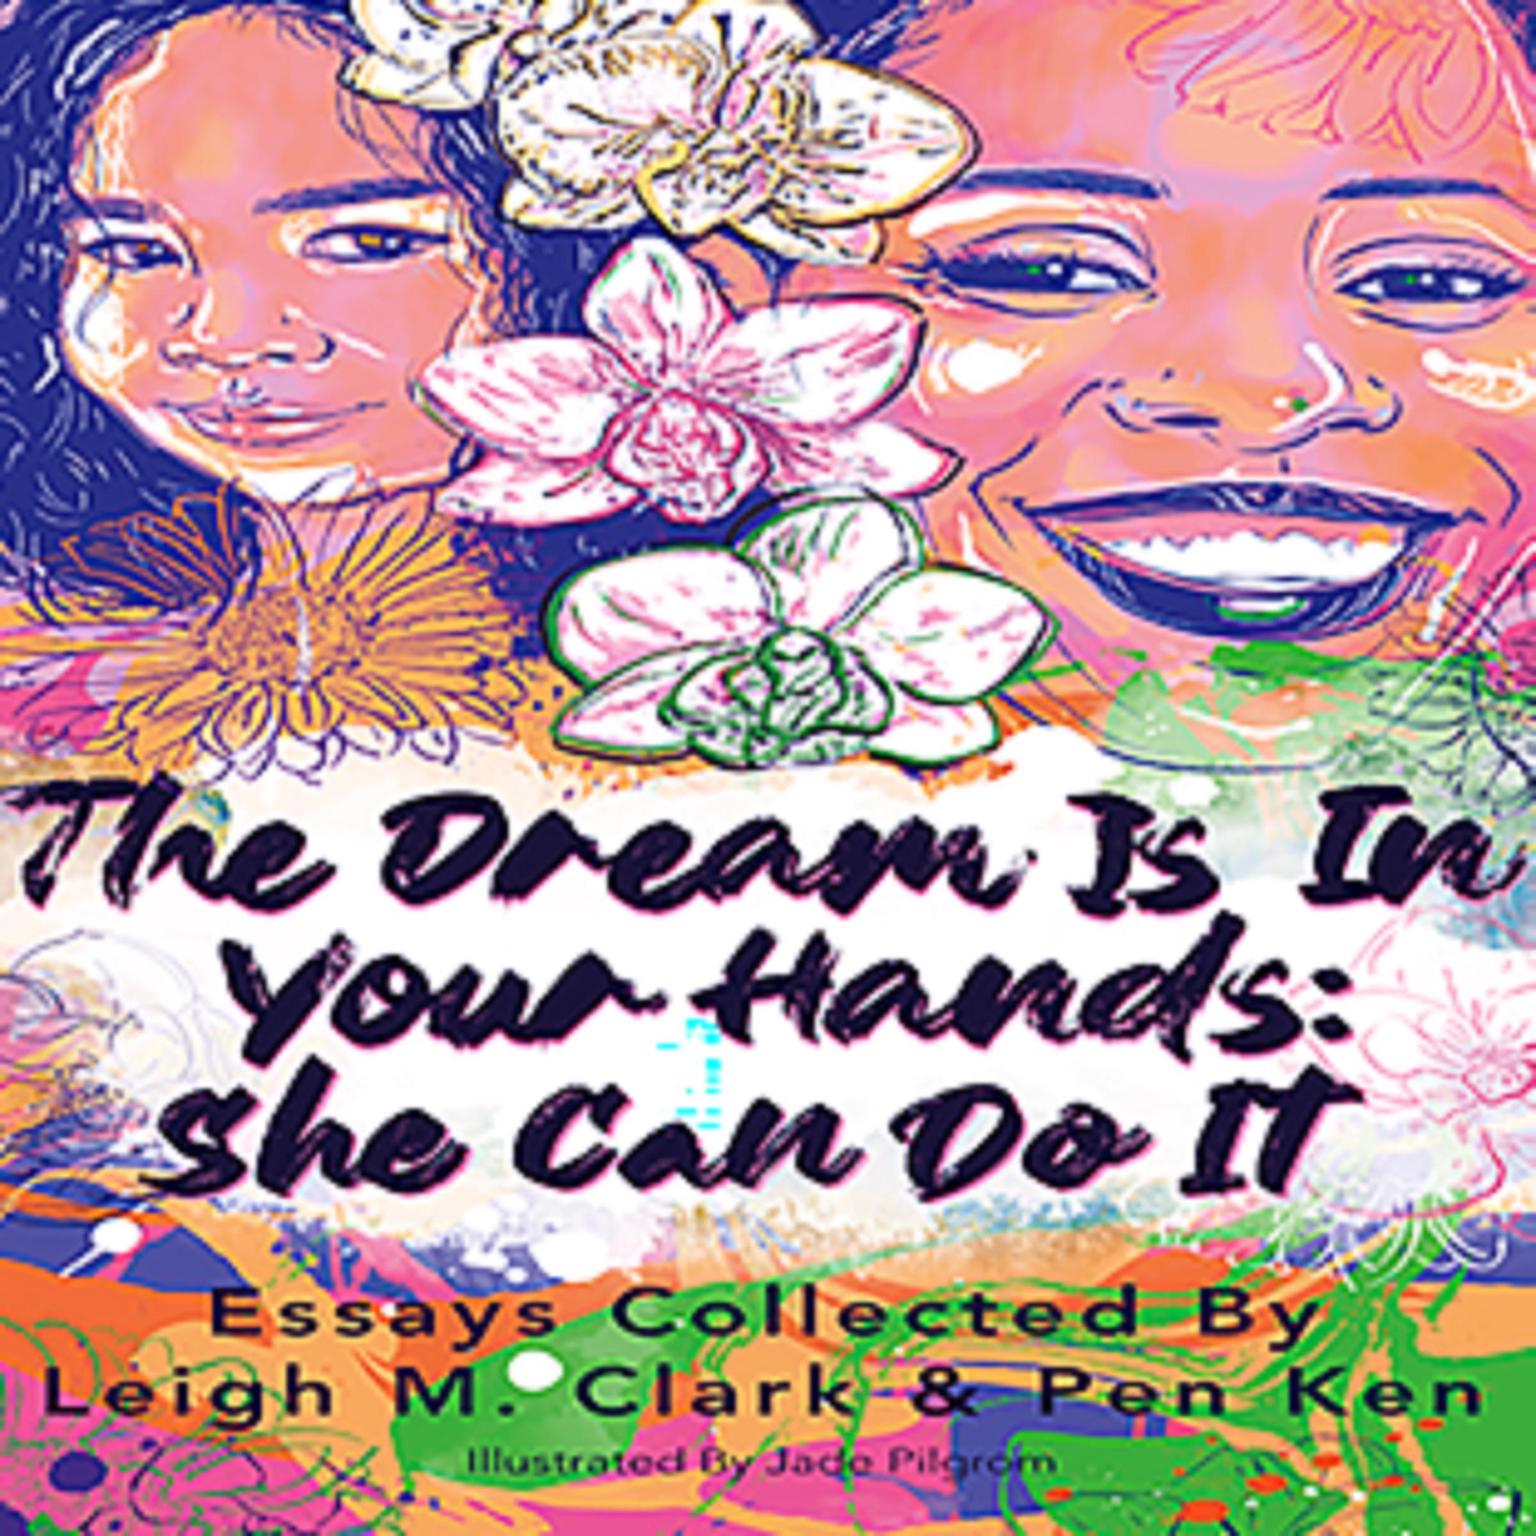 The Dream is in Your Hands: She Can Do It Audiobook, by Leigh M Clark